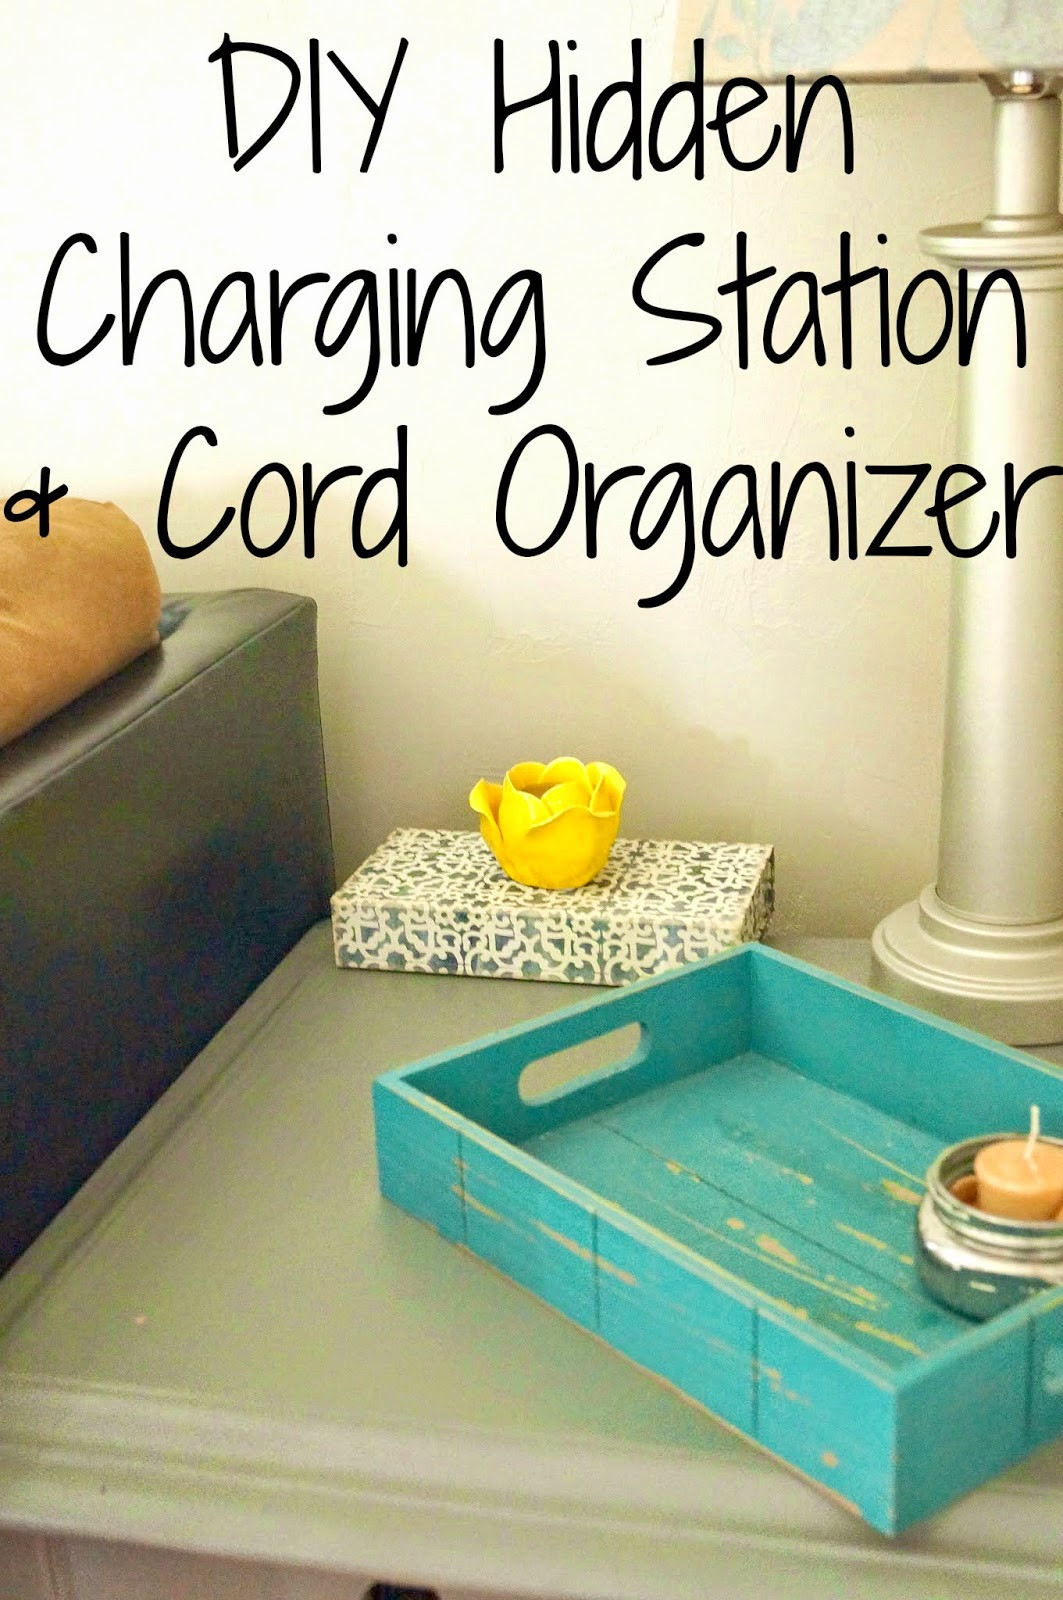 Charger Organizer DIY
 DIY Charging Station & Cord Organizer Old House to New Home